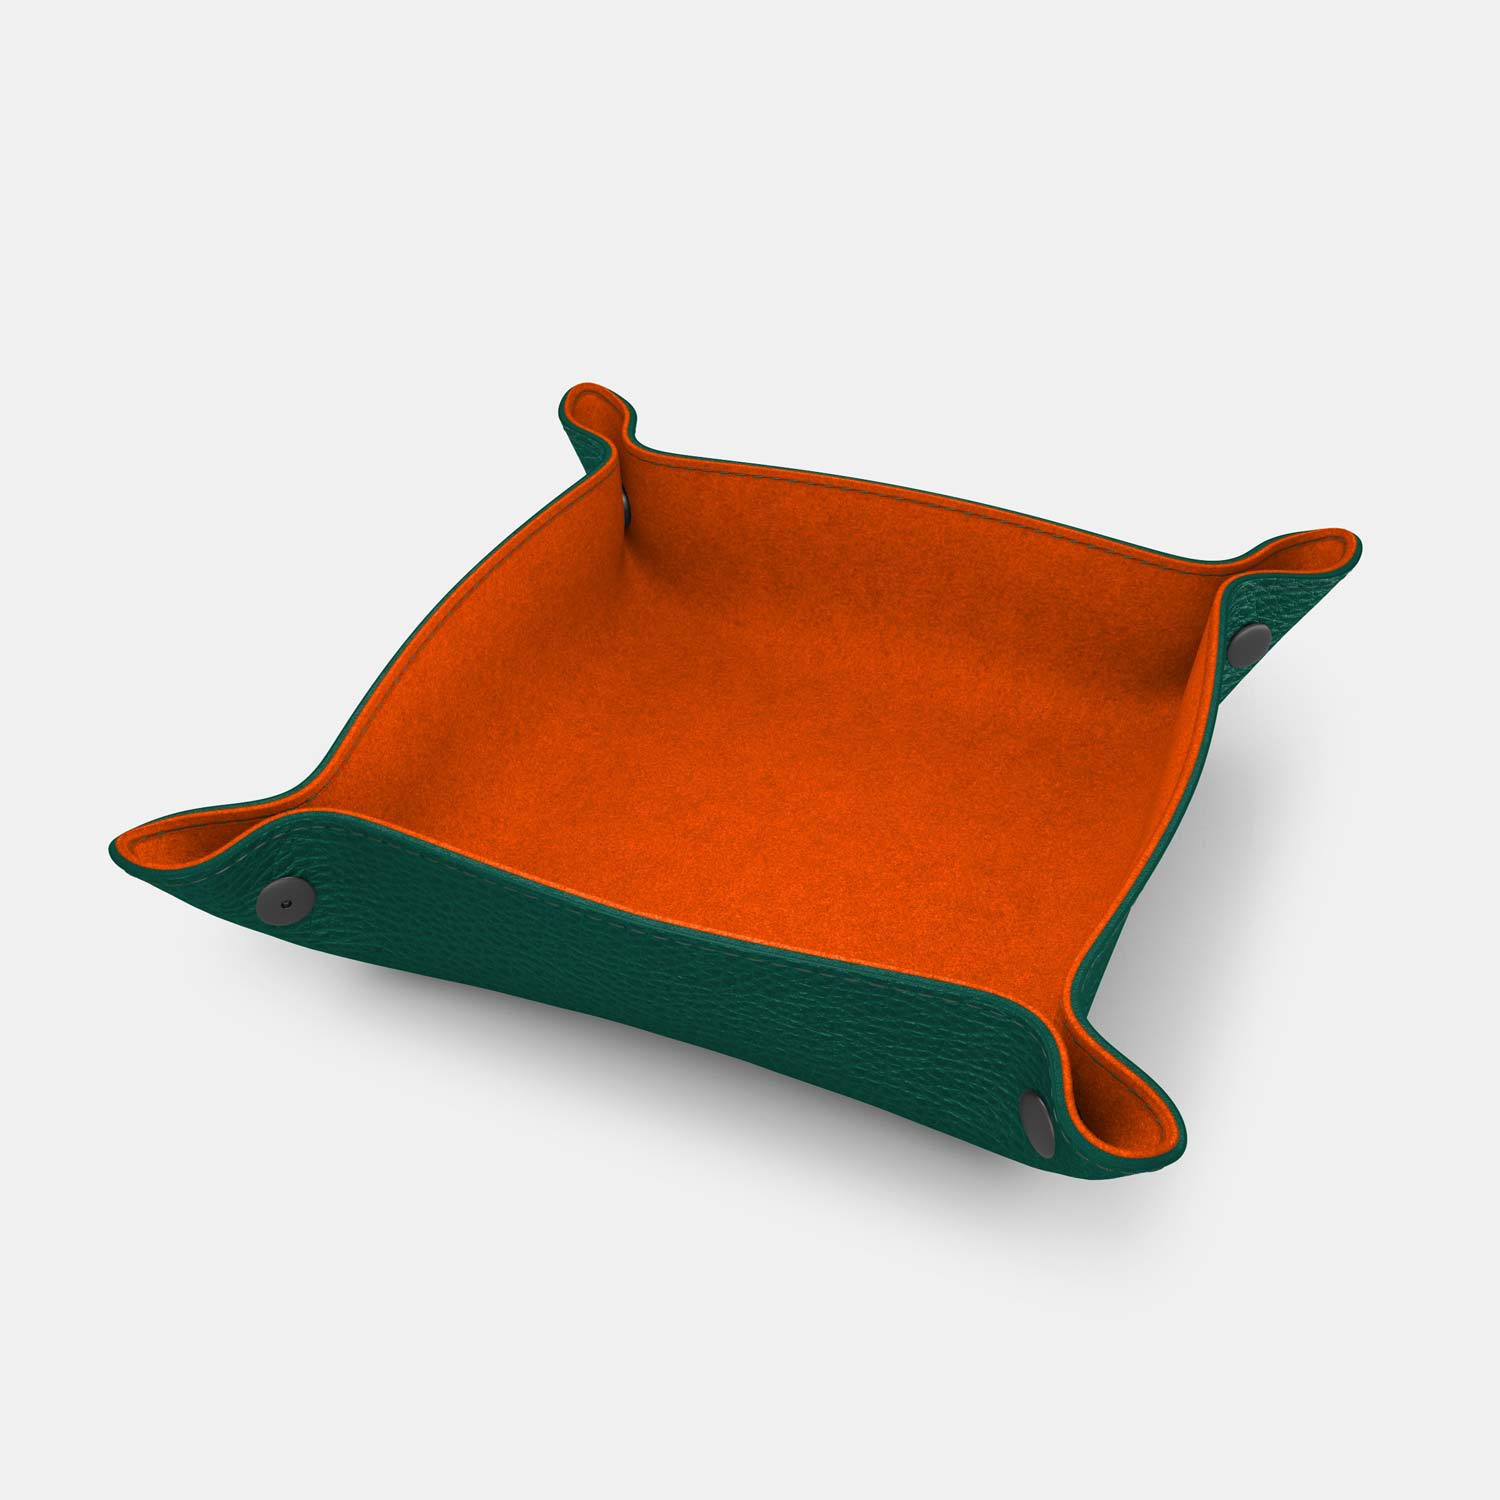 Leather Catch-all Tray - Avocado Green and Orange - RYAN London